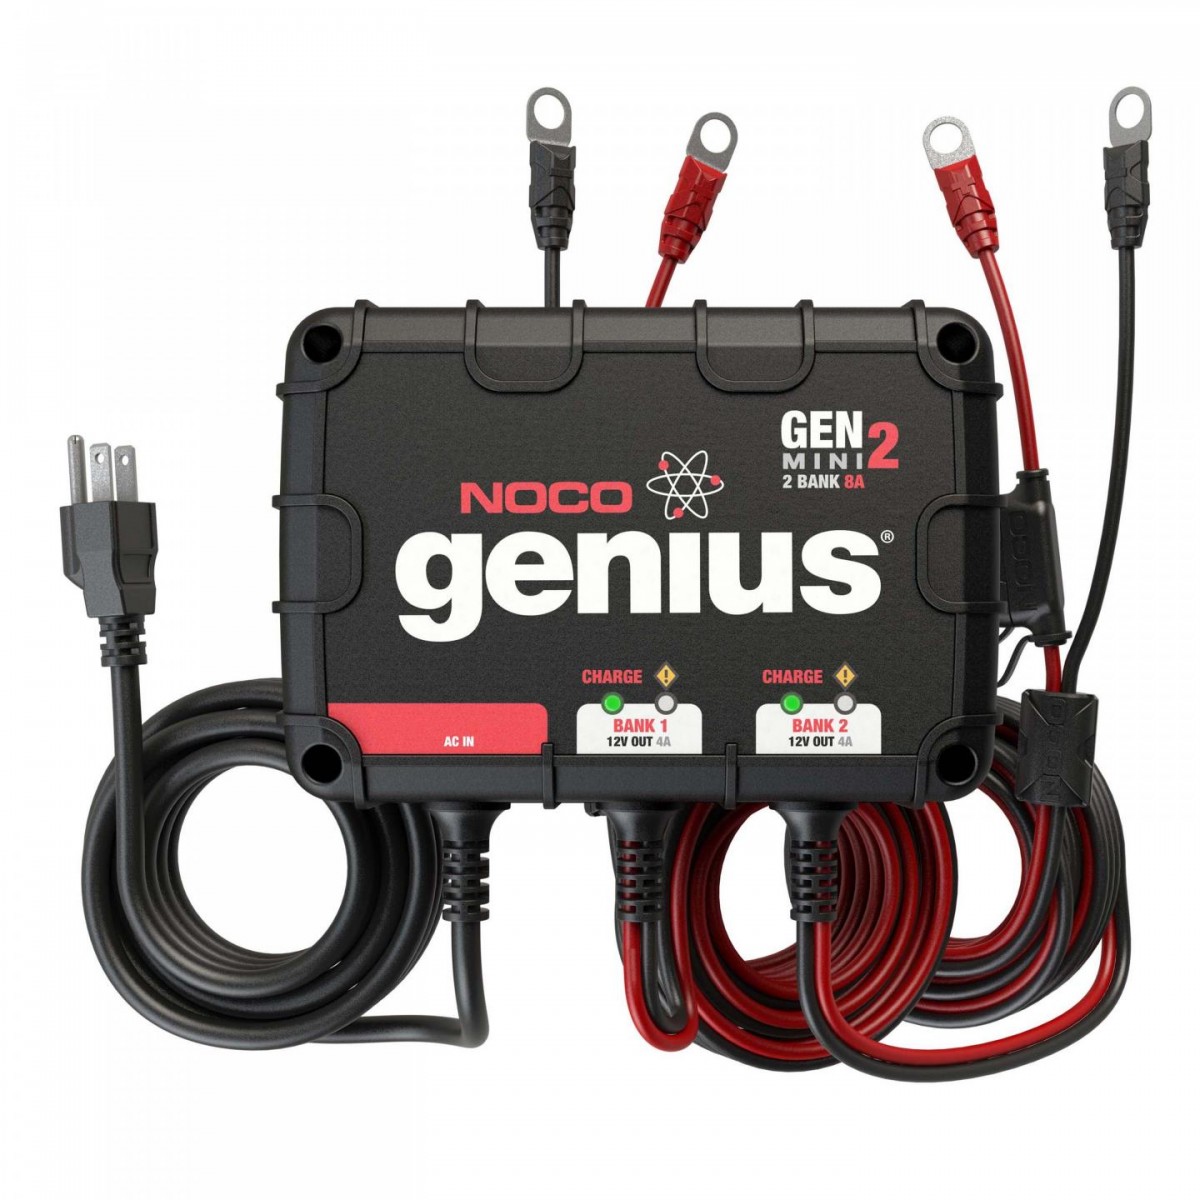 NOCO Genius 2 Bank Charger – The Bass Tank